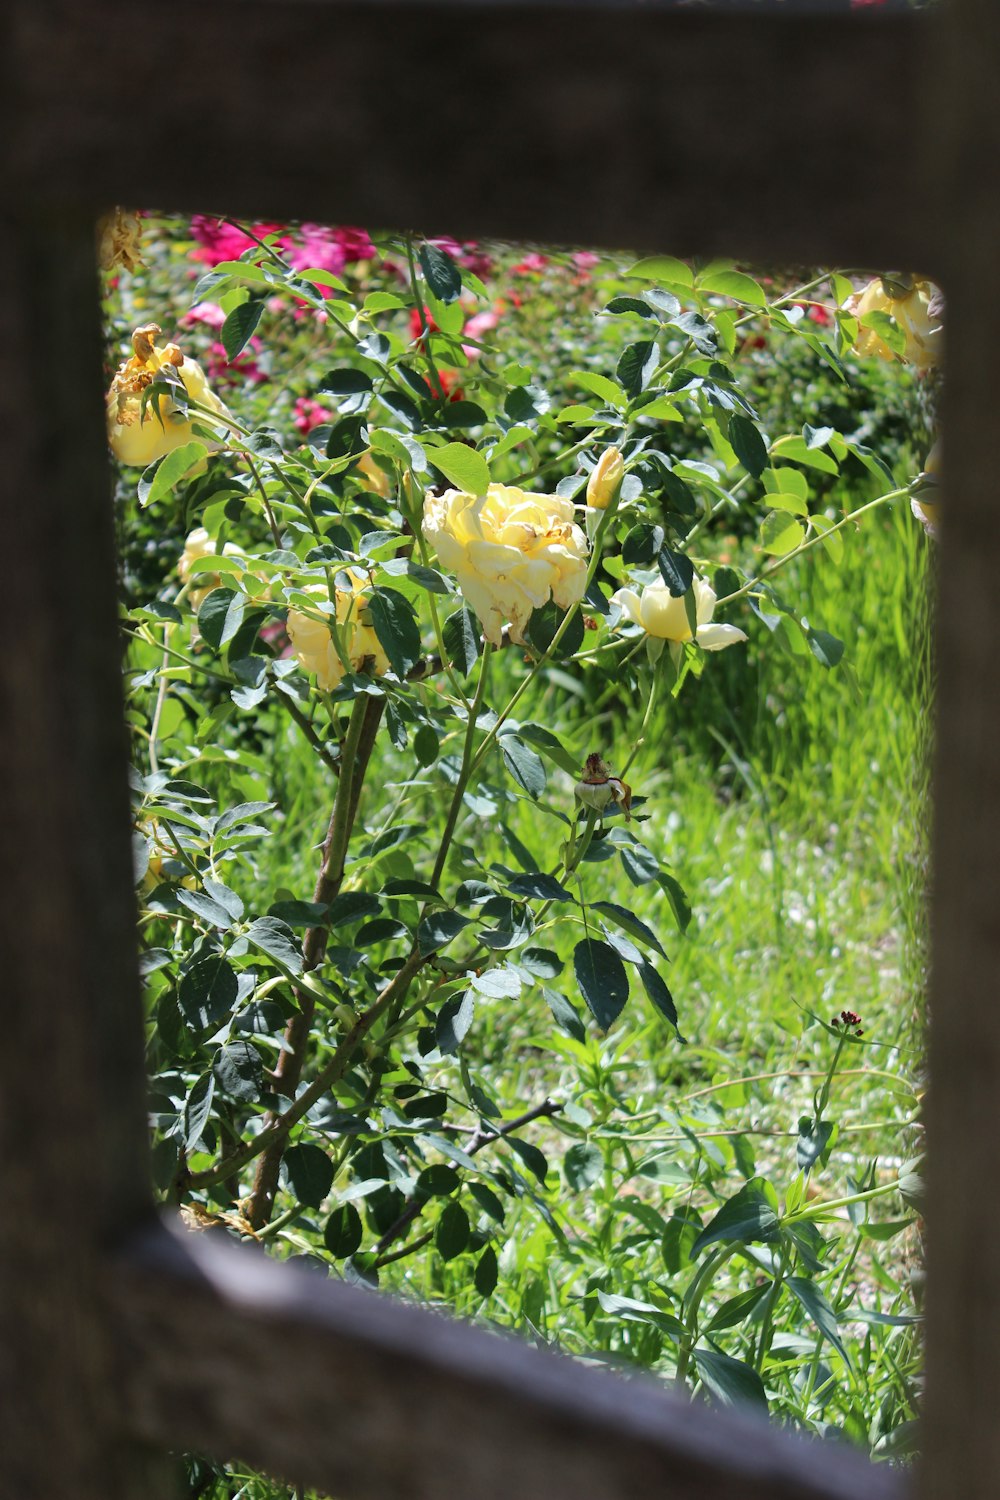 a view of a field of flowers through a window